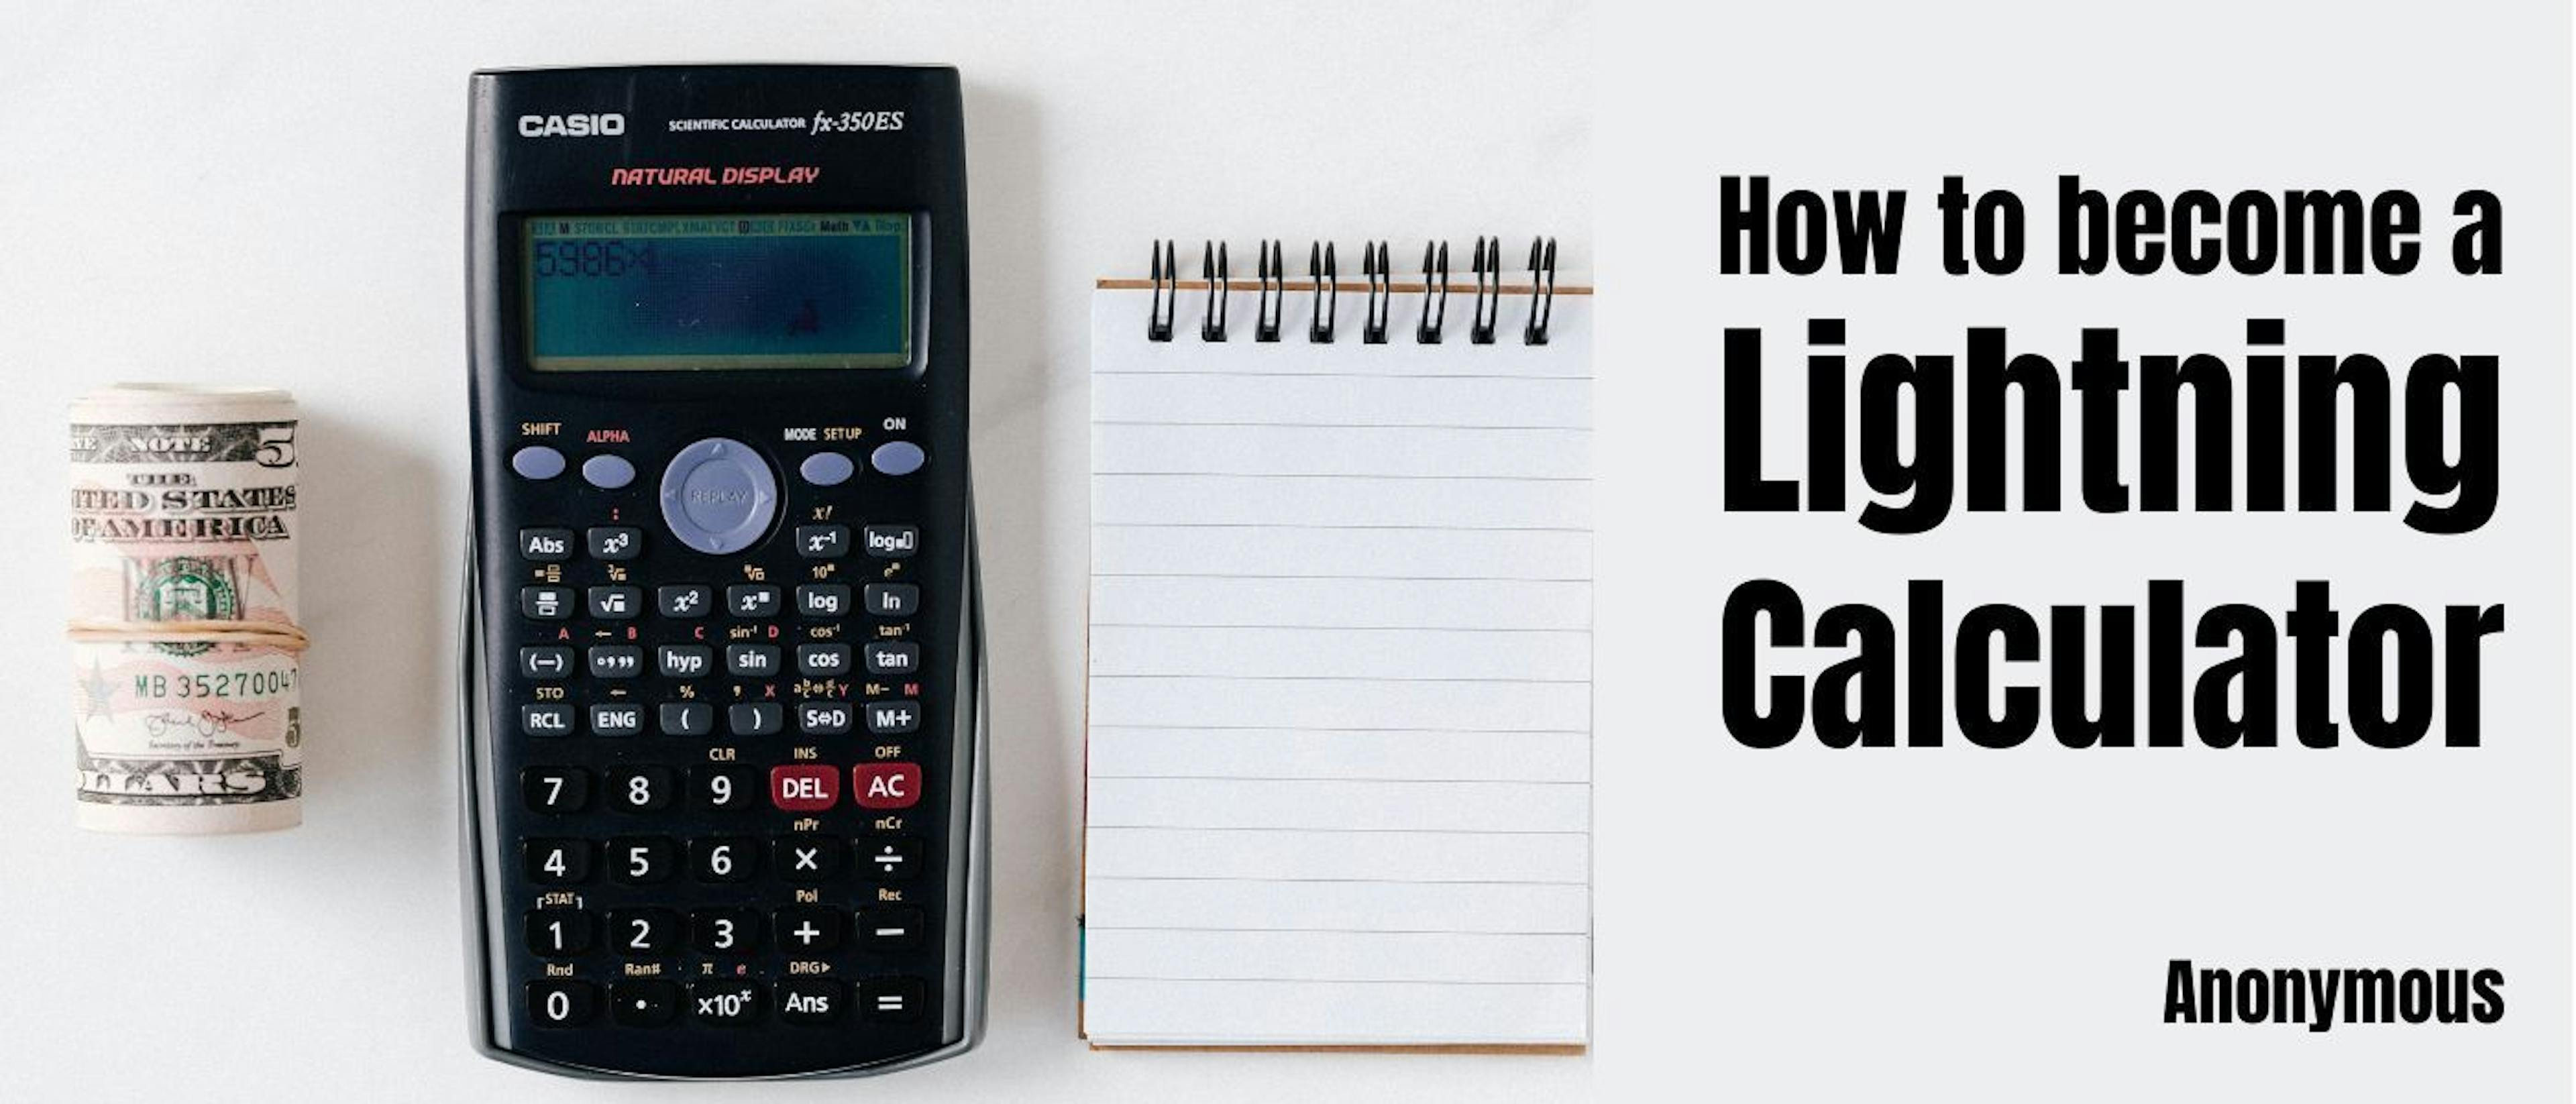 featured image - The Lightning Calculator’s Addition.